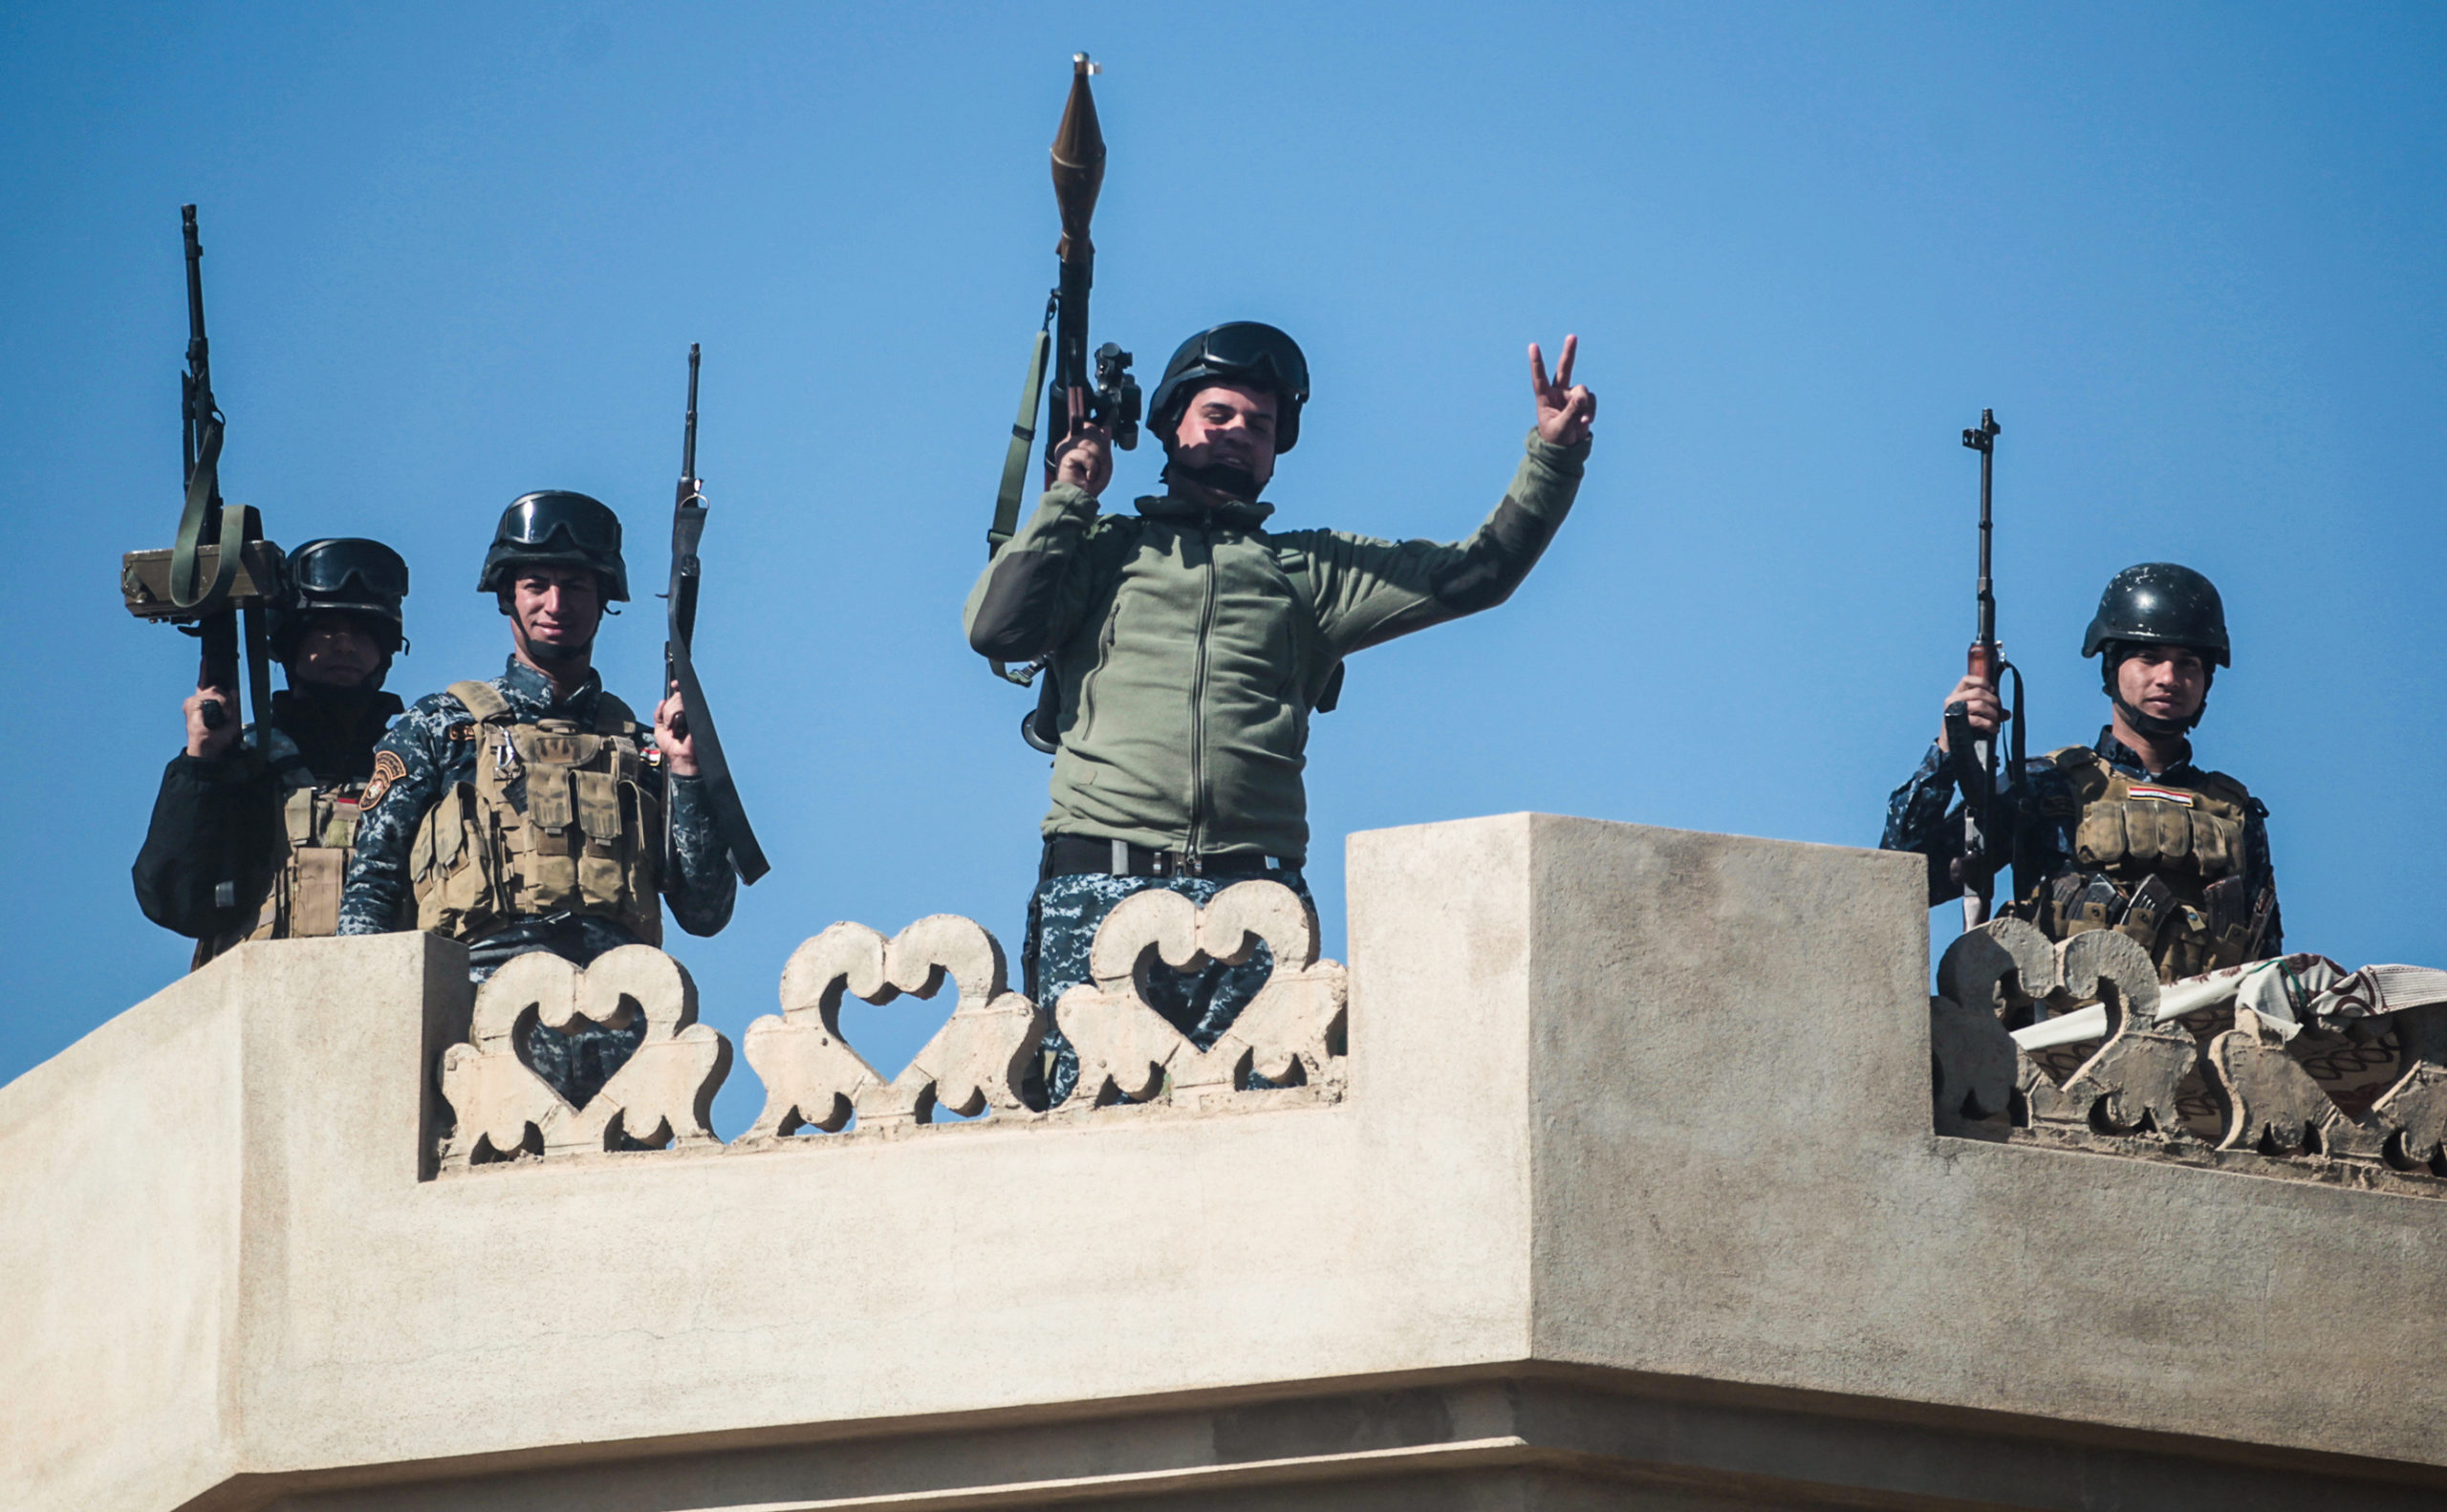 Members of the Iraqi security forces pose from atop a building, raising the victory gesture, in the village of al-Buseif, south of Mosul, during an offensive by Iraqi forces to retake the western side of the city from Islamic State (IS) group fighters on February 22, 2017. (AHMAD AL-RUBAYE/AFP via Getty Images)